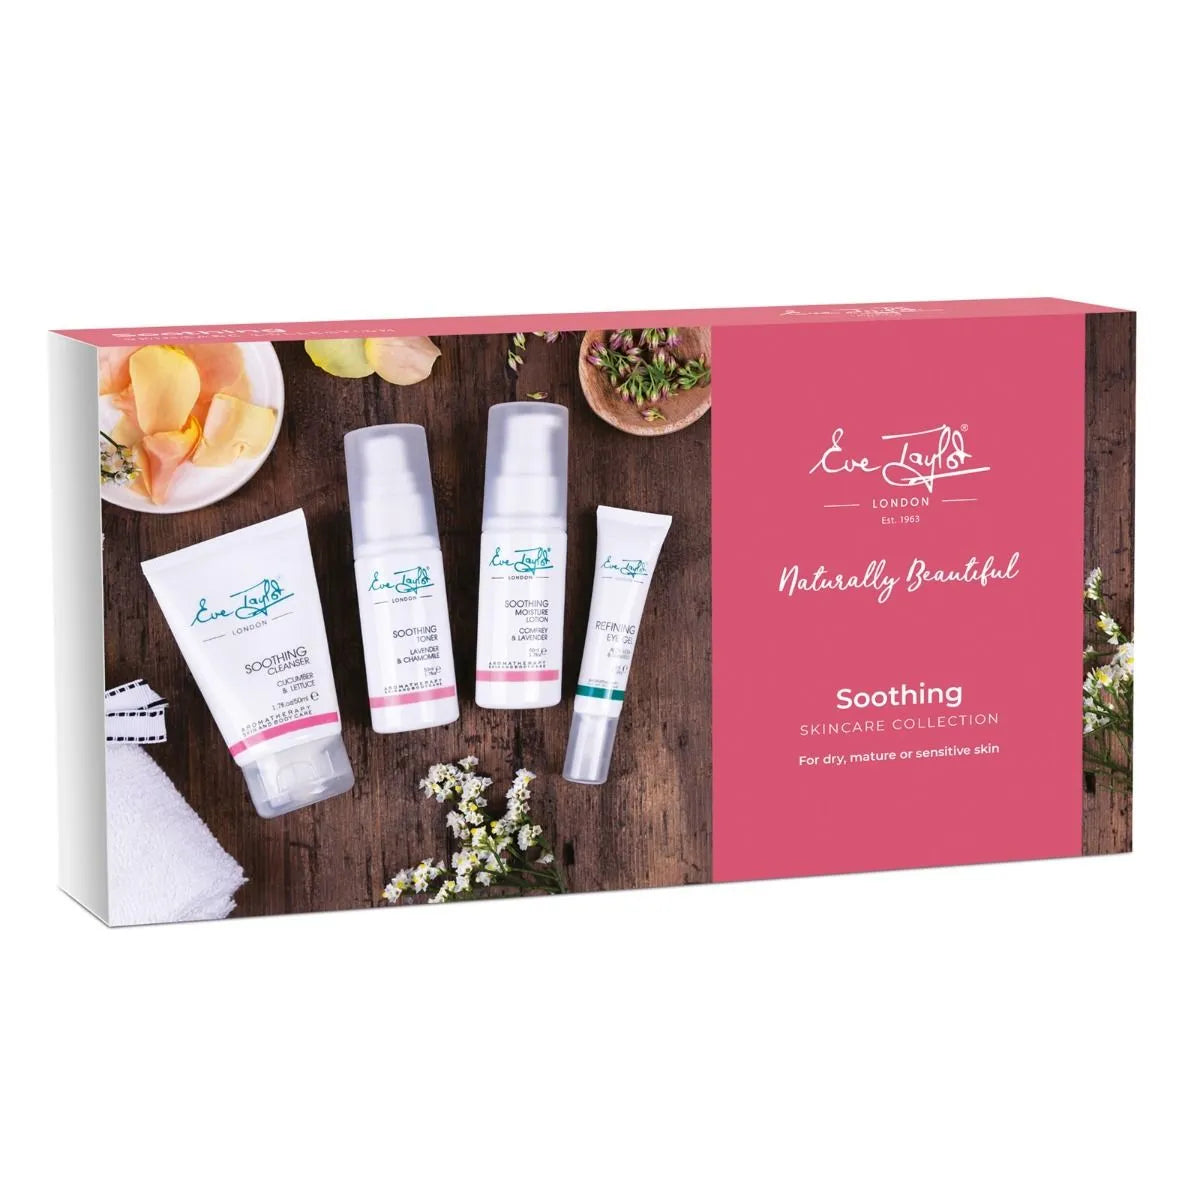 Soothing Skincare Collection Kit